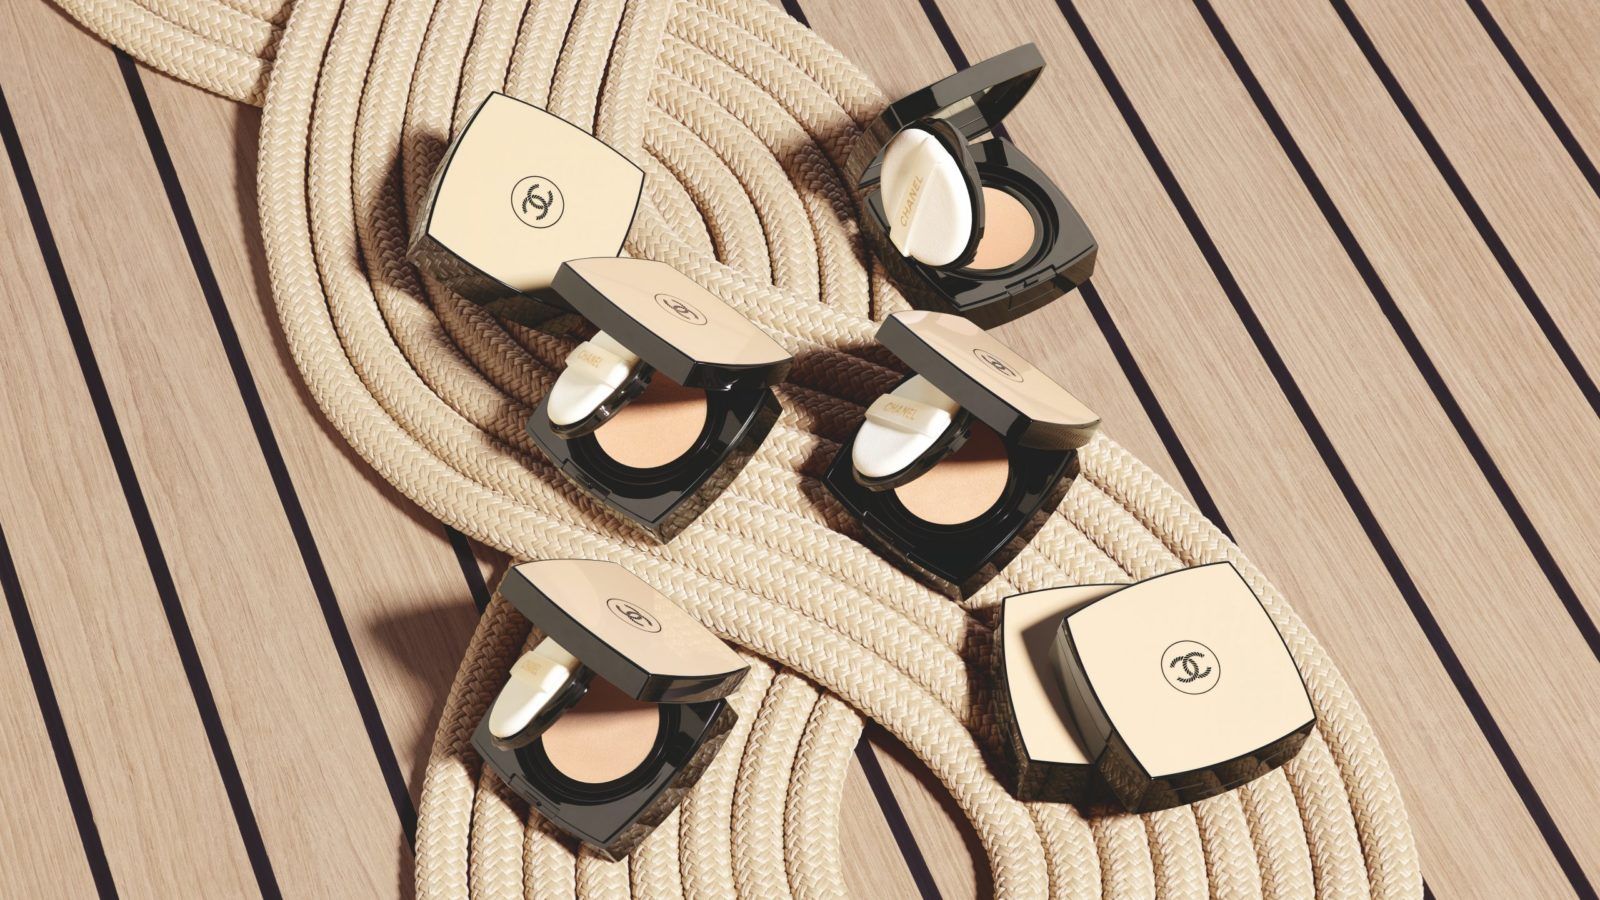 Achieve peak summer glow with Chanel's latest Les Beiges collection